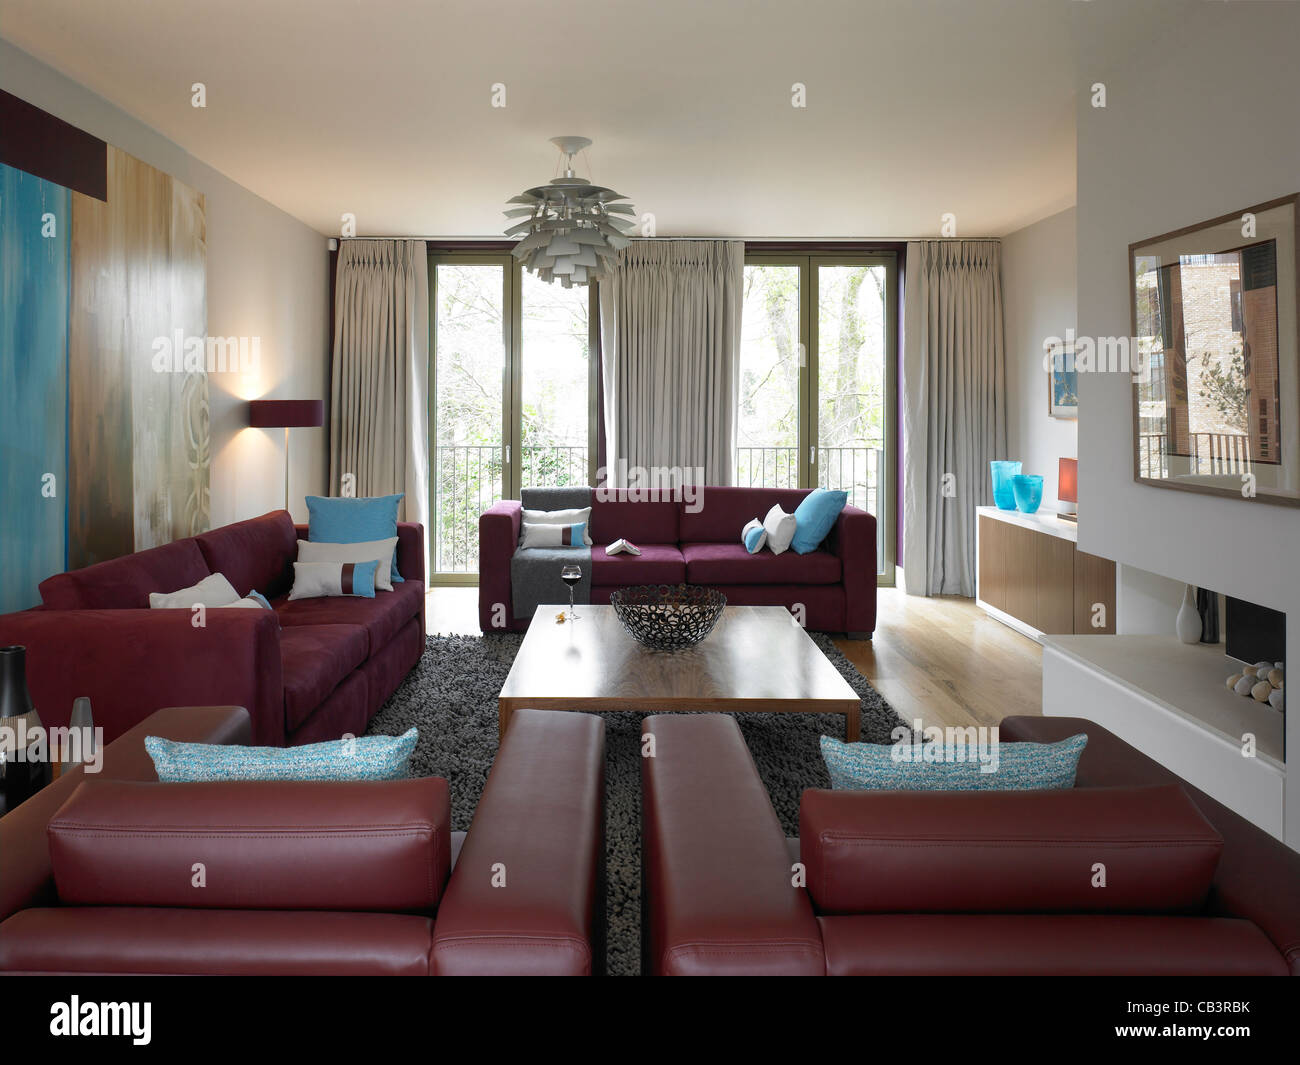 Living room area of modern home Stock Photo